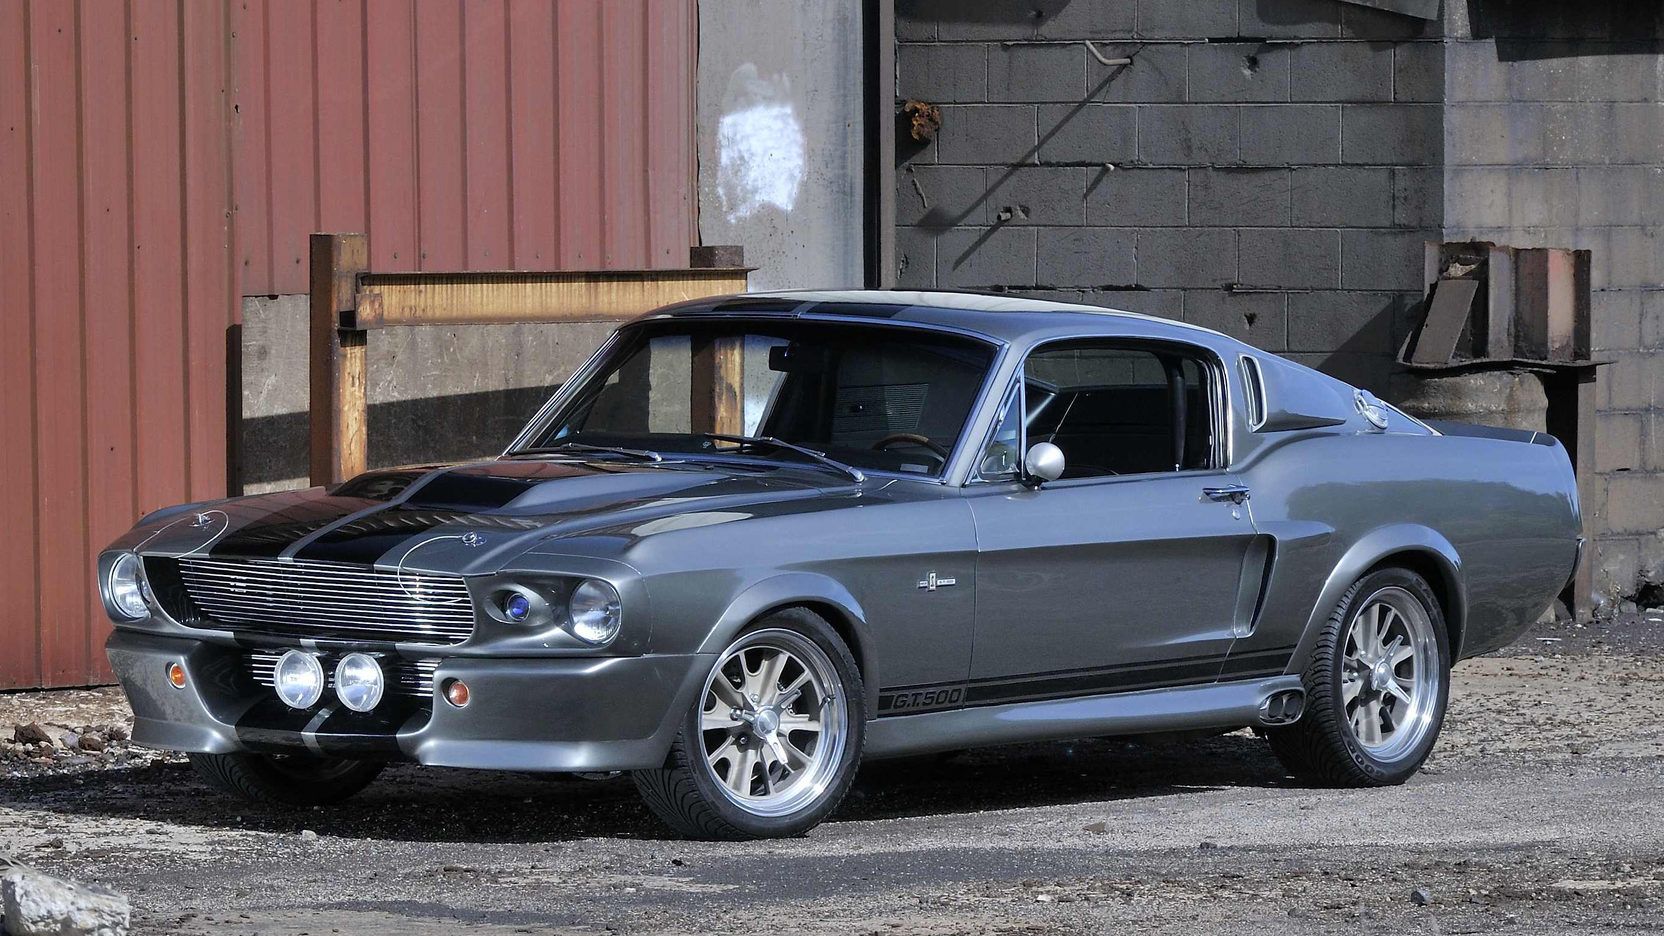 Parked "Eleanor" 1967 Shwlby GT500